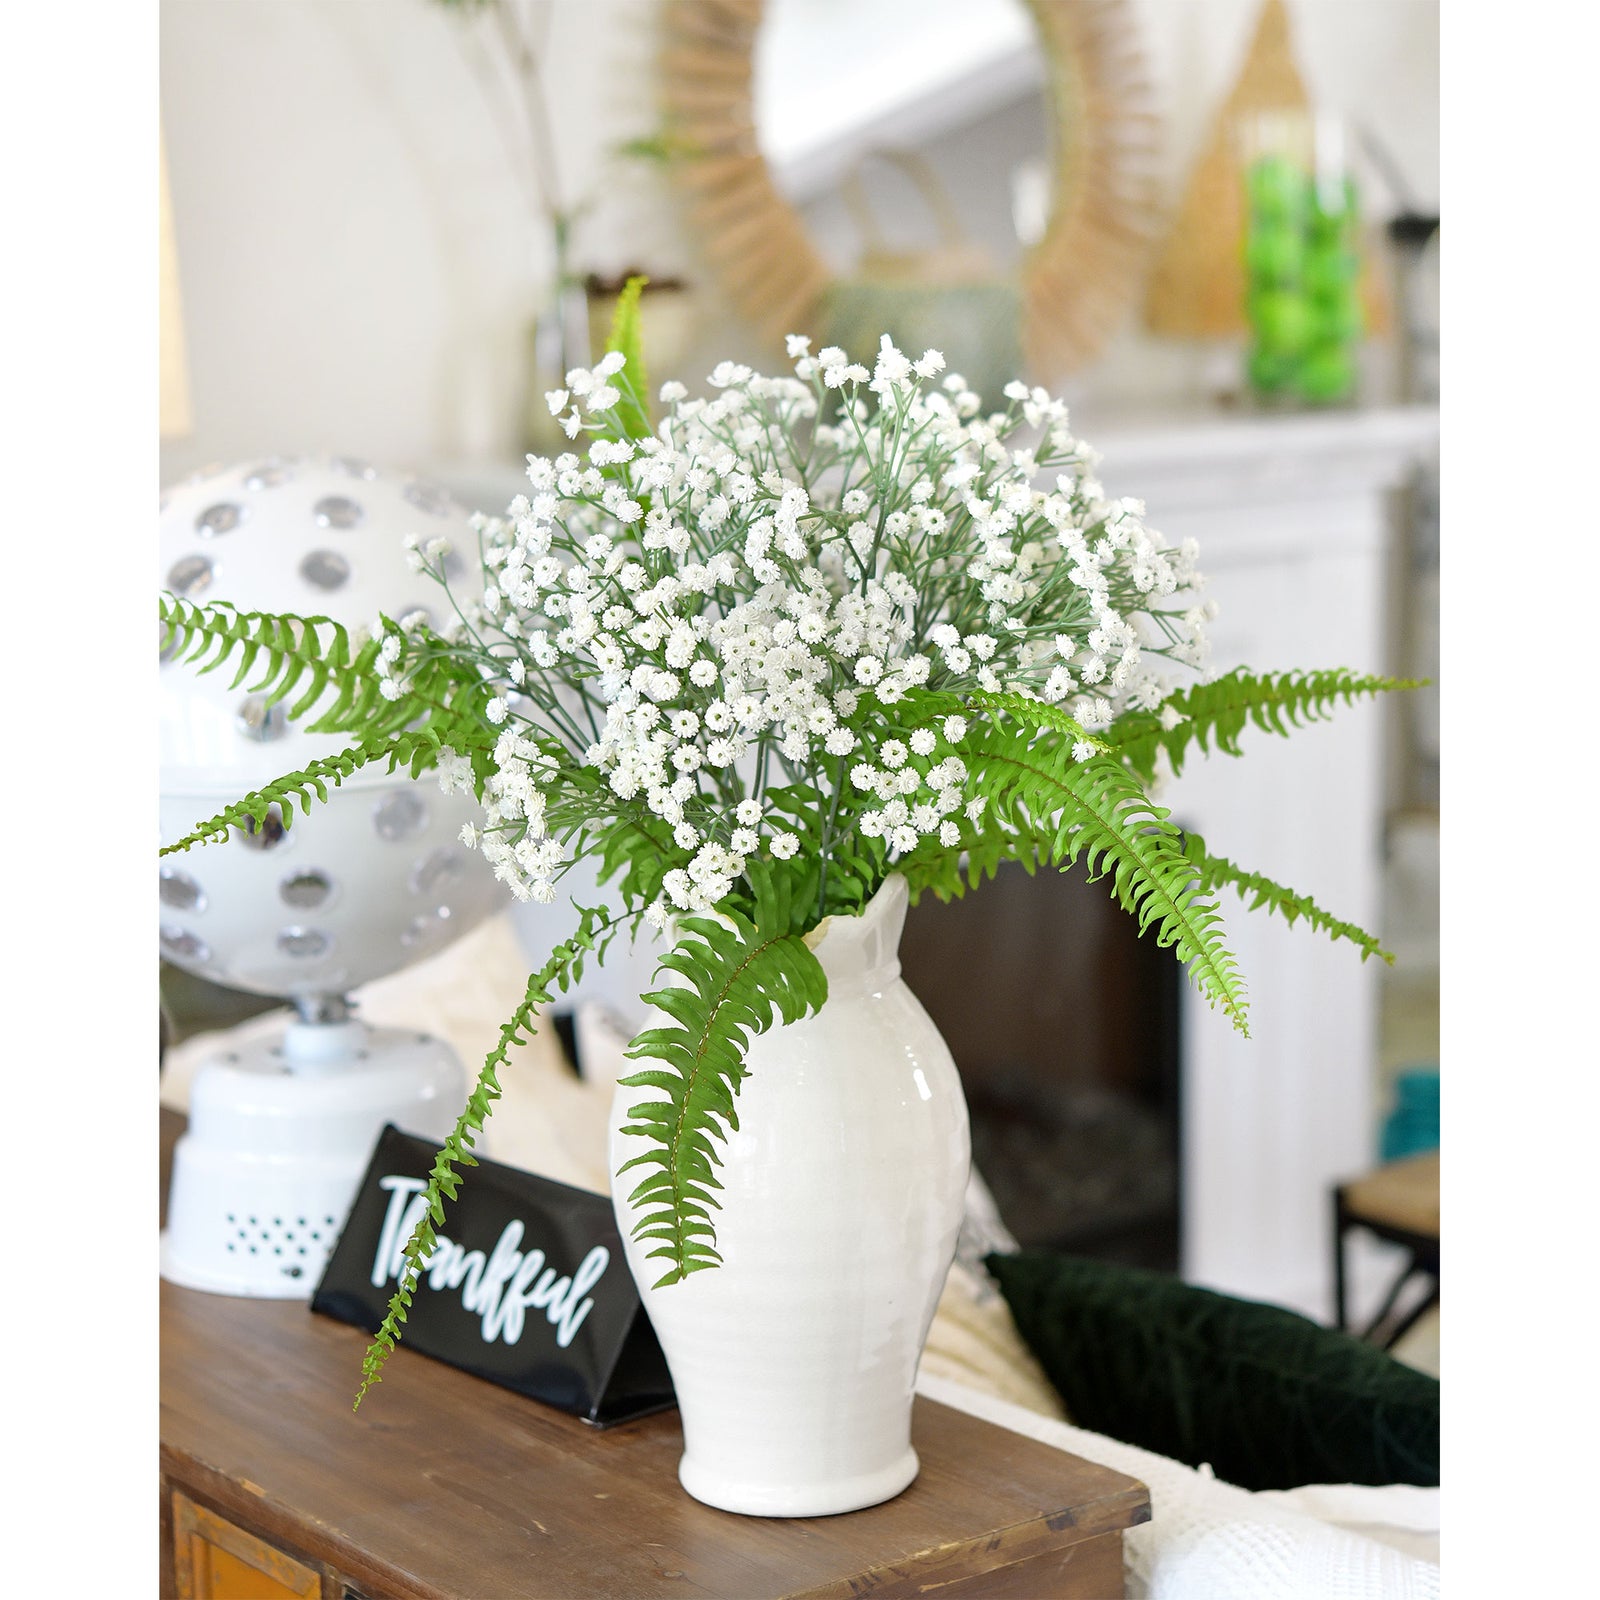 6 Stems 69cm Floral White Baby’s Breath Artificial Flowers Baby’s Breath Gypsophila Tall Long Stems